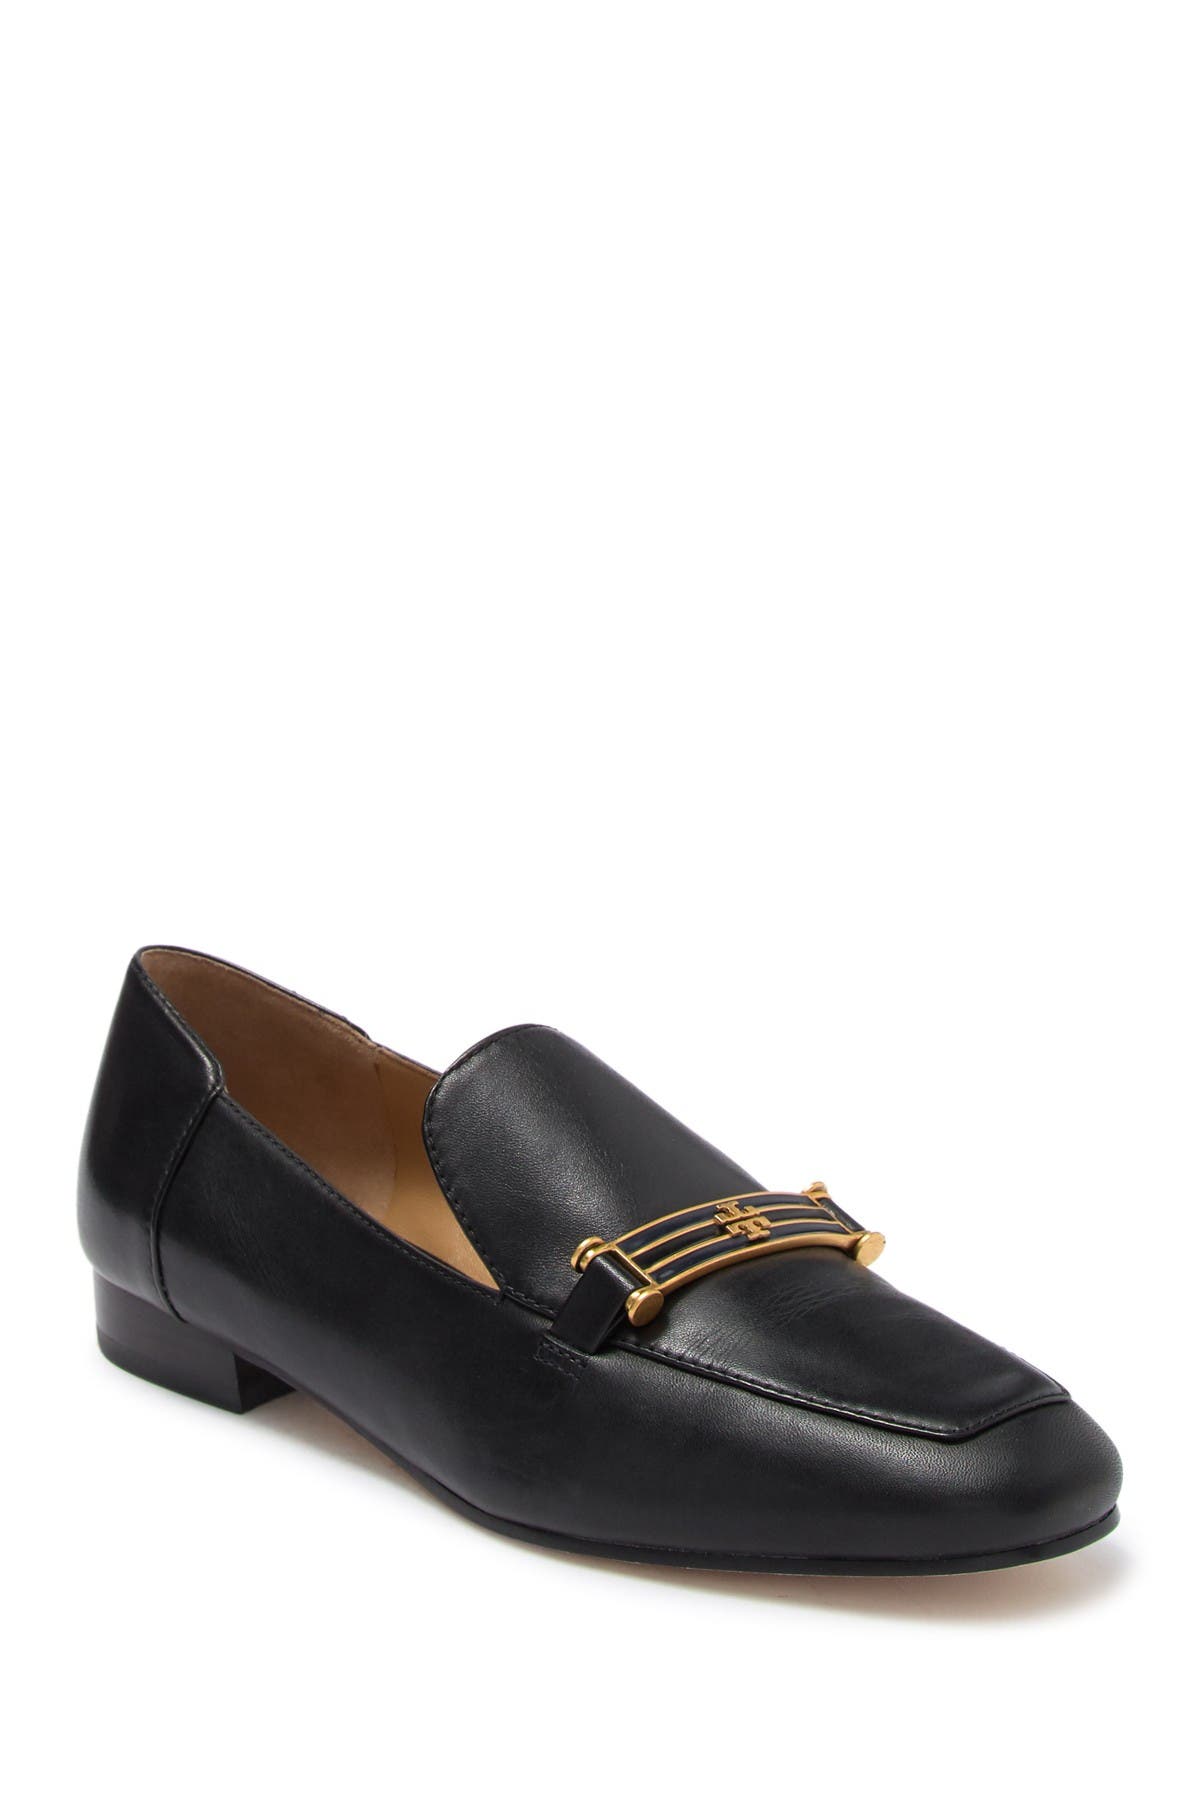 Tory Burch | Amelia Leather Loafer 